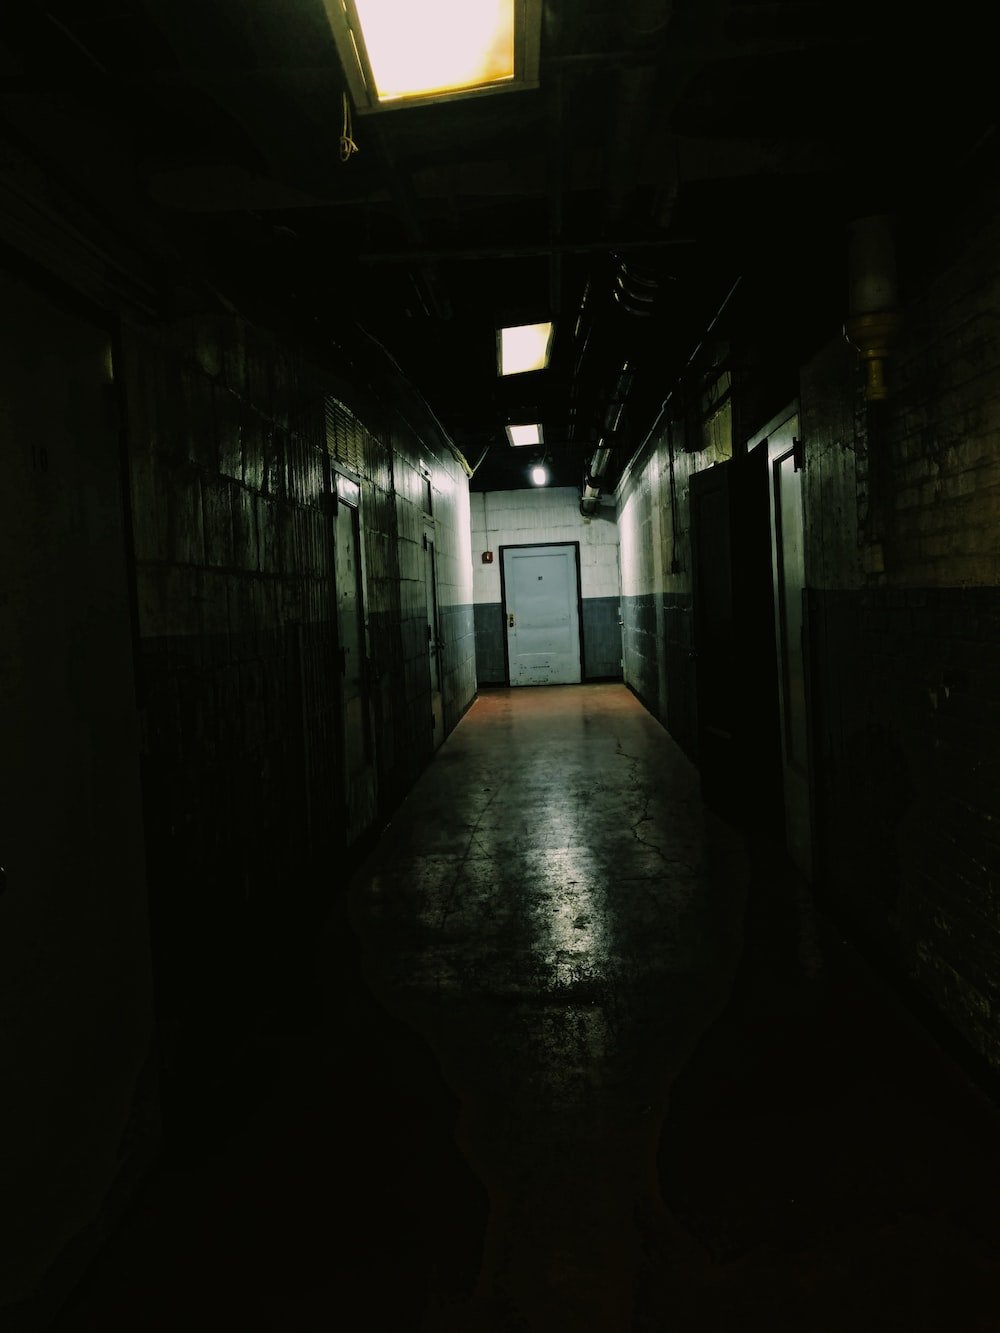 Scary Hallway Picture. Download Free Image